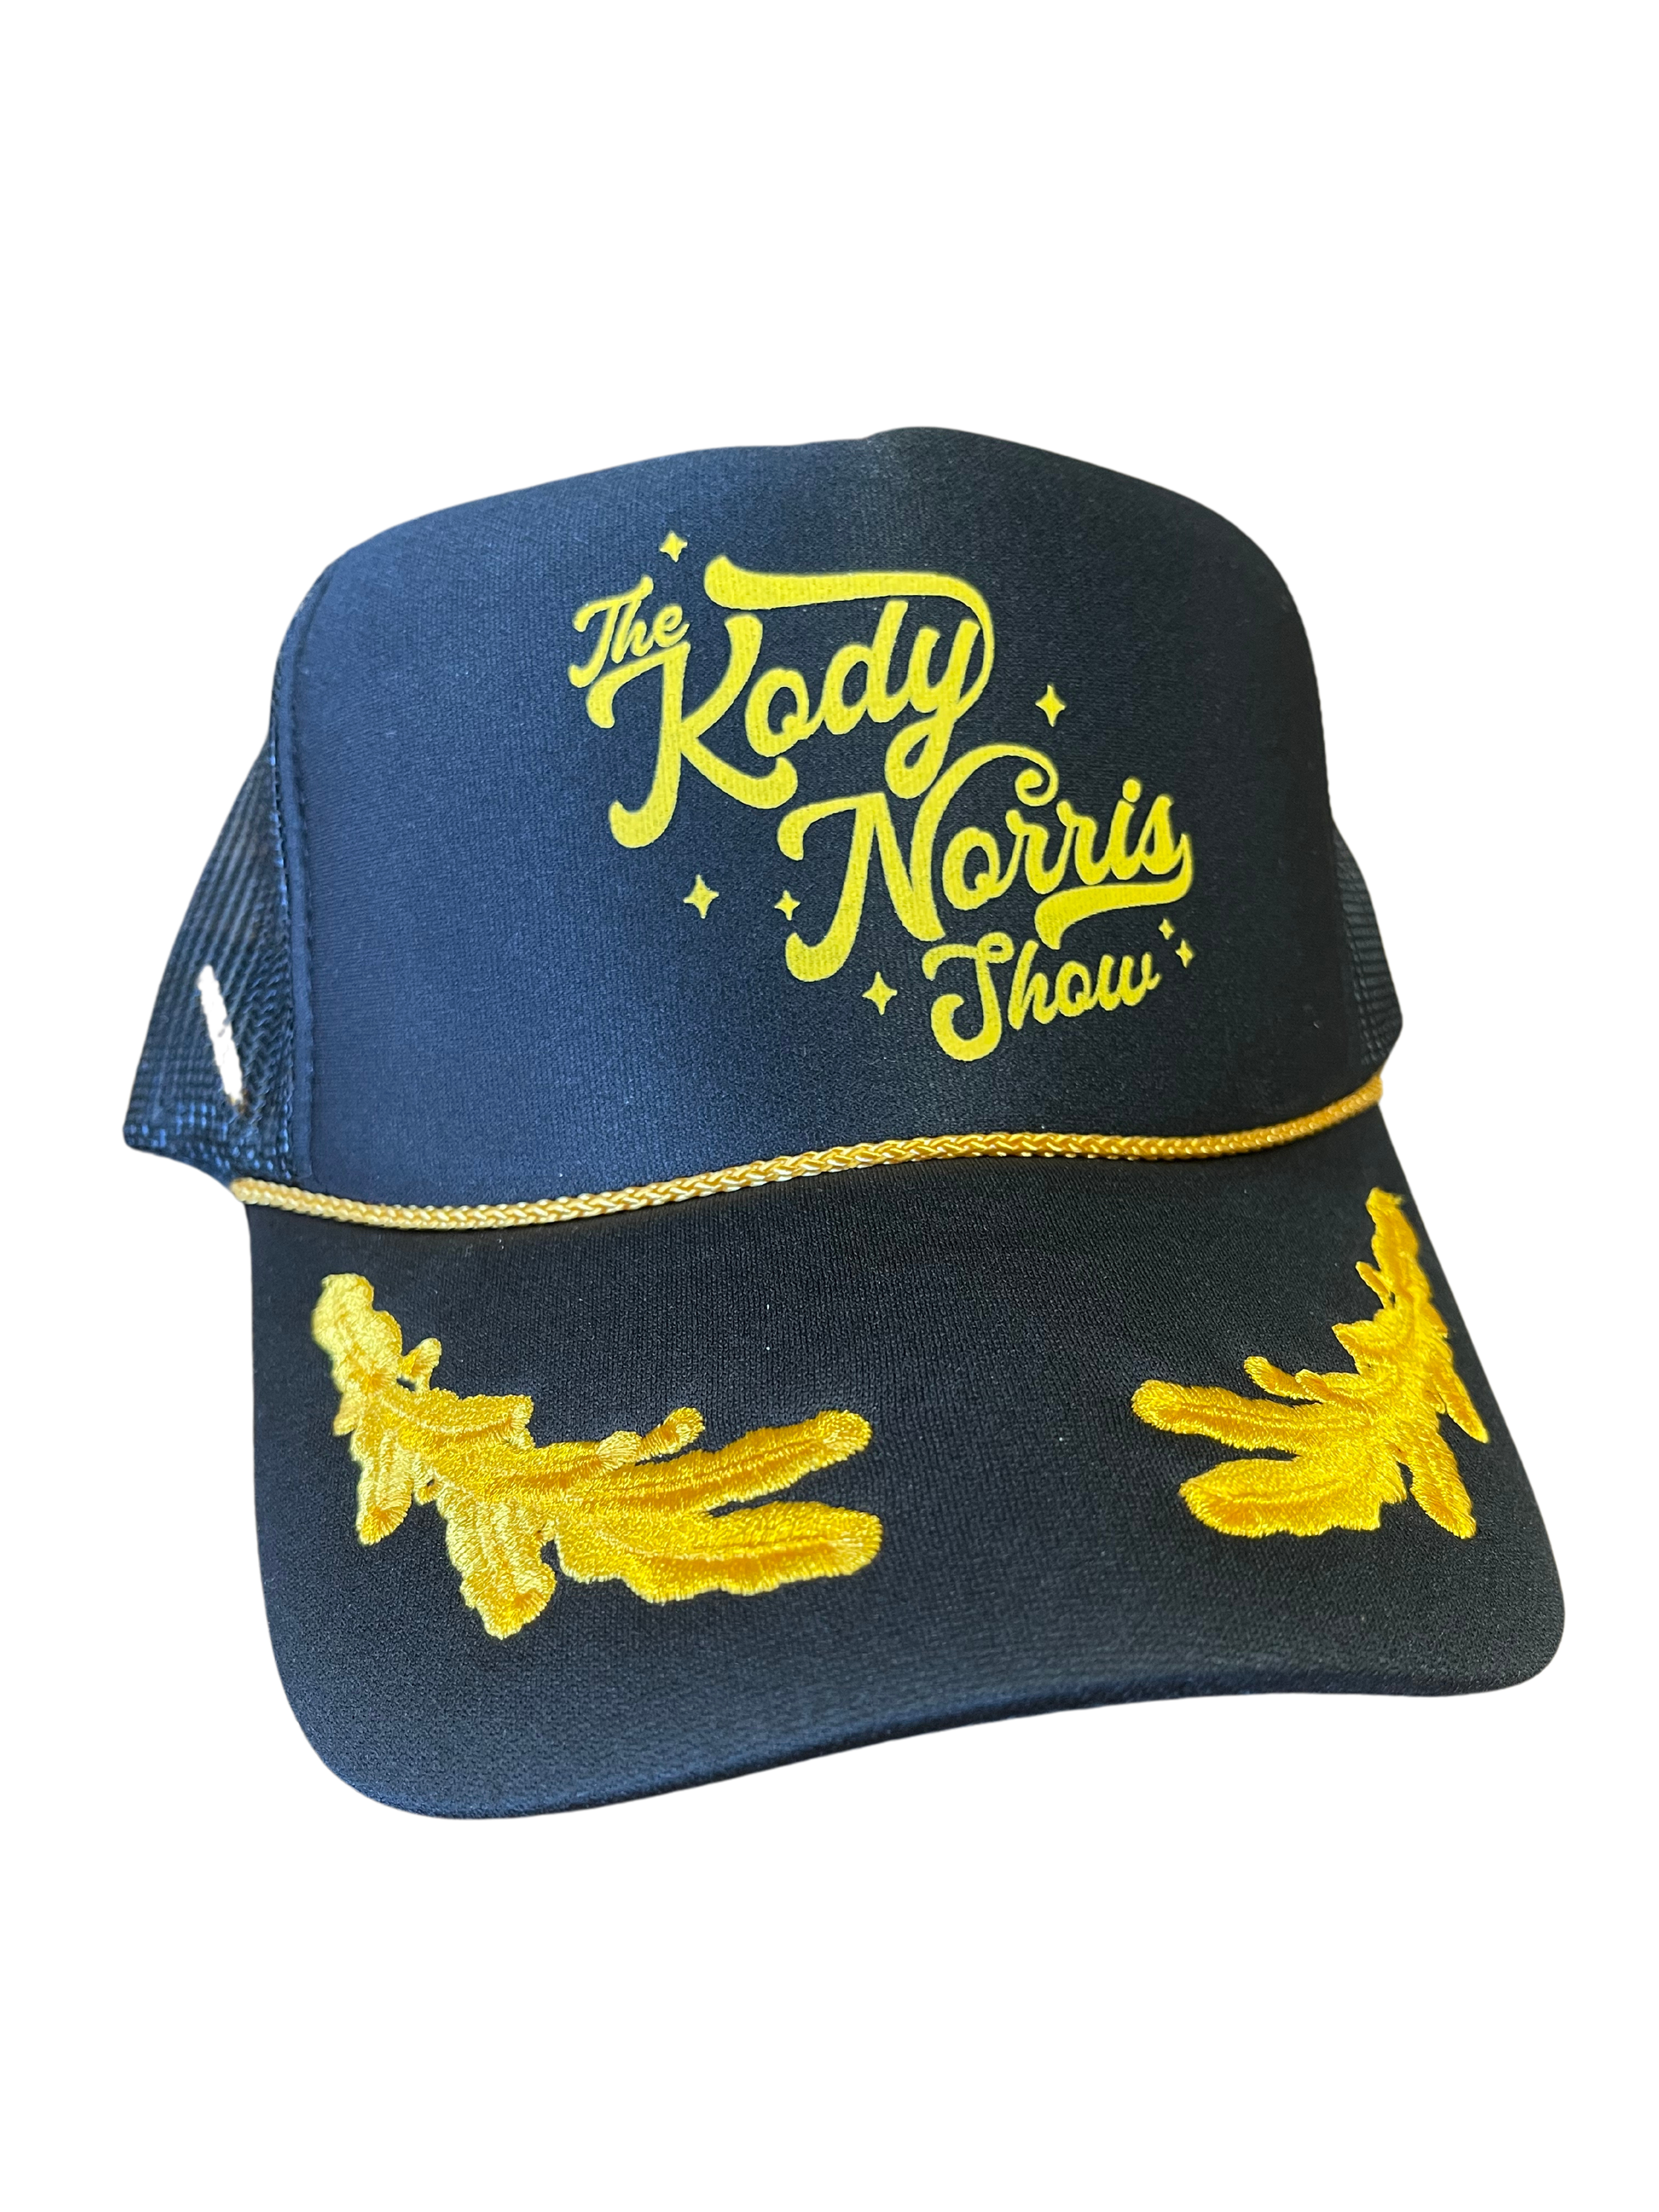 Scrambled Eggs Otto Trucker Hat  Black and Gold. Adjustable sizing.